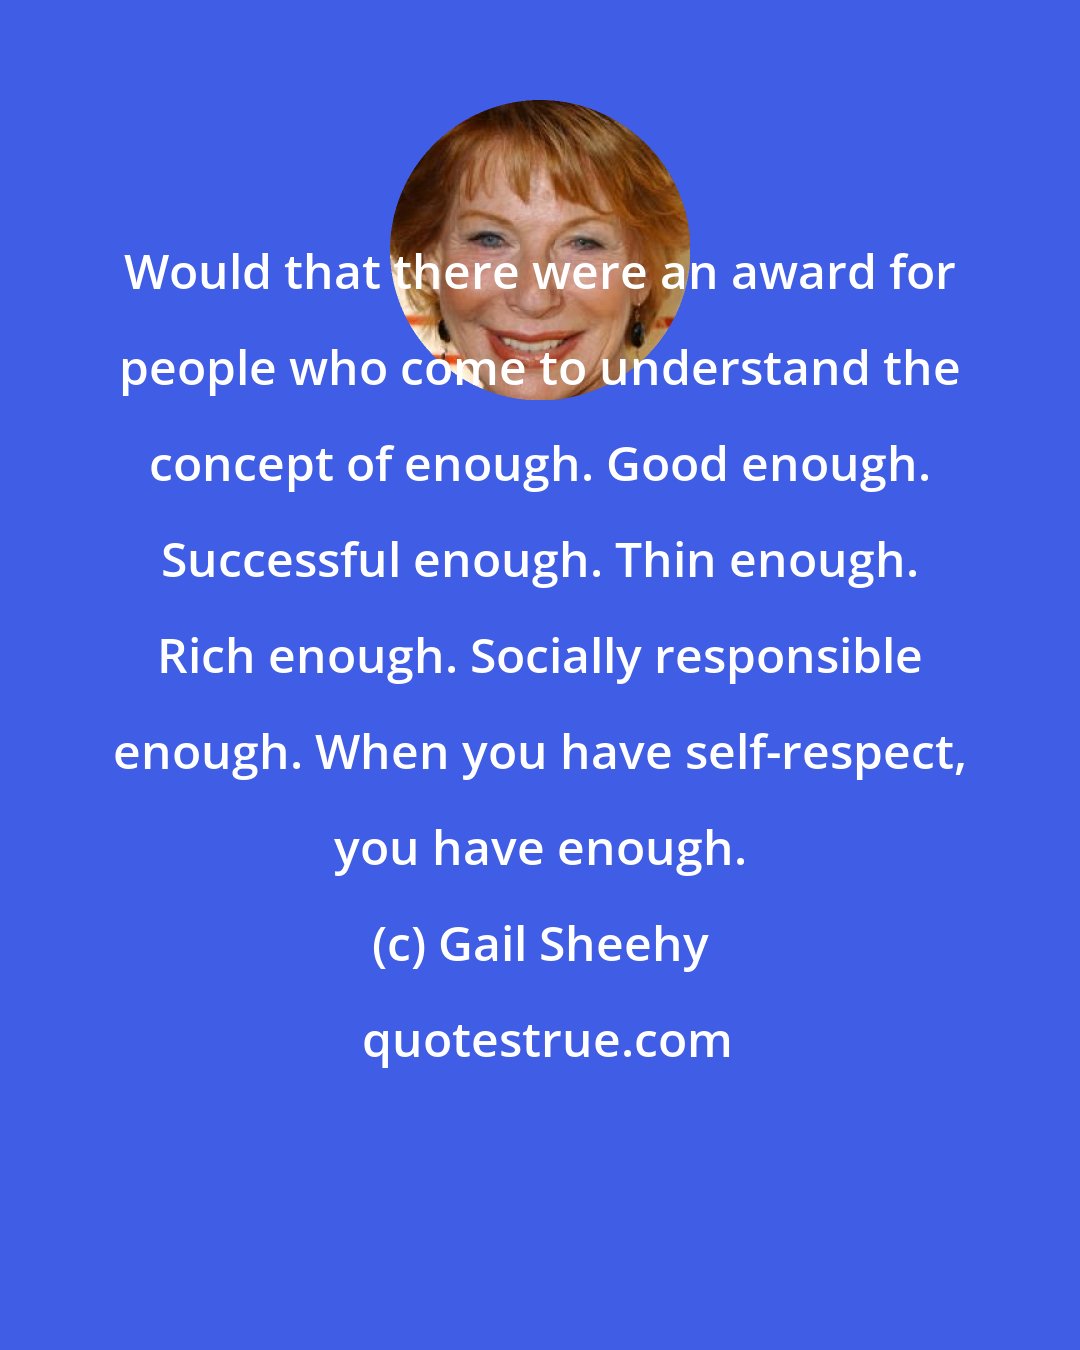 Gail Sheehy: Would that there were an award for people who come to understand the concept of enough. Good enough. Successful enough. Thin enough. Rich enough. Socially responsible enough. When you have self-respect, you have enough.